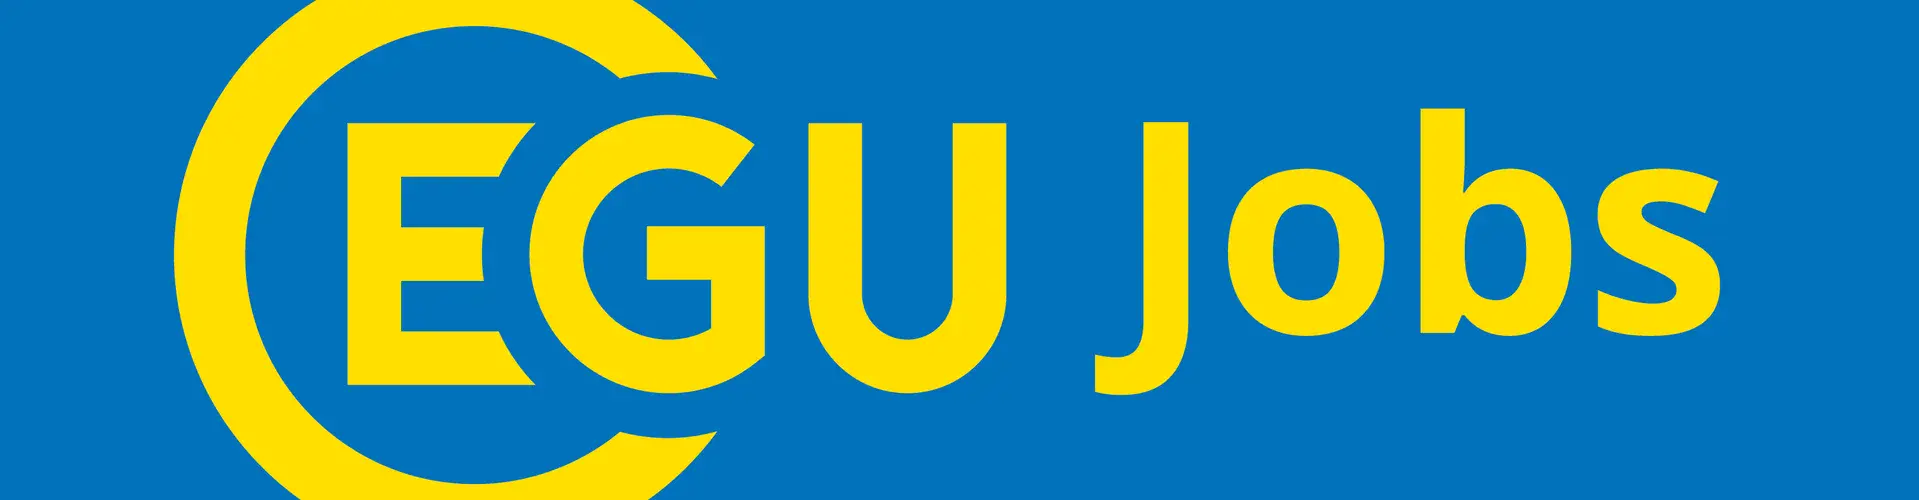 Join the EGU team